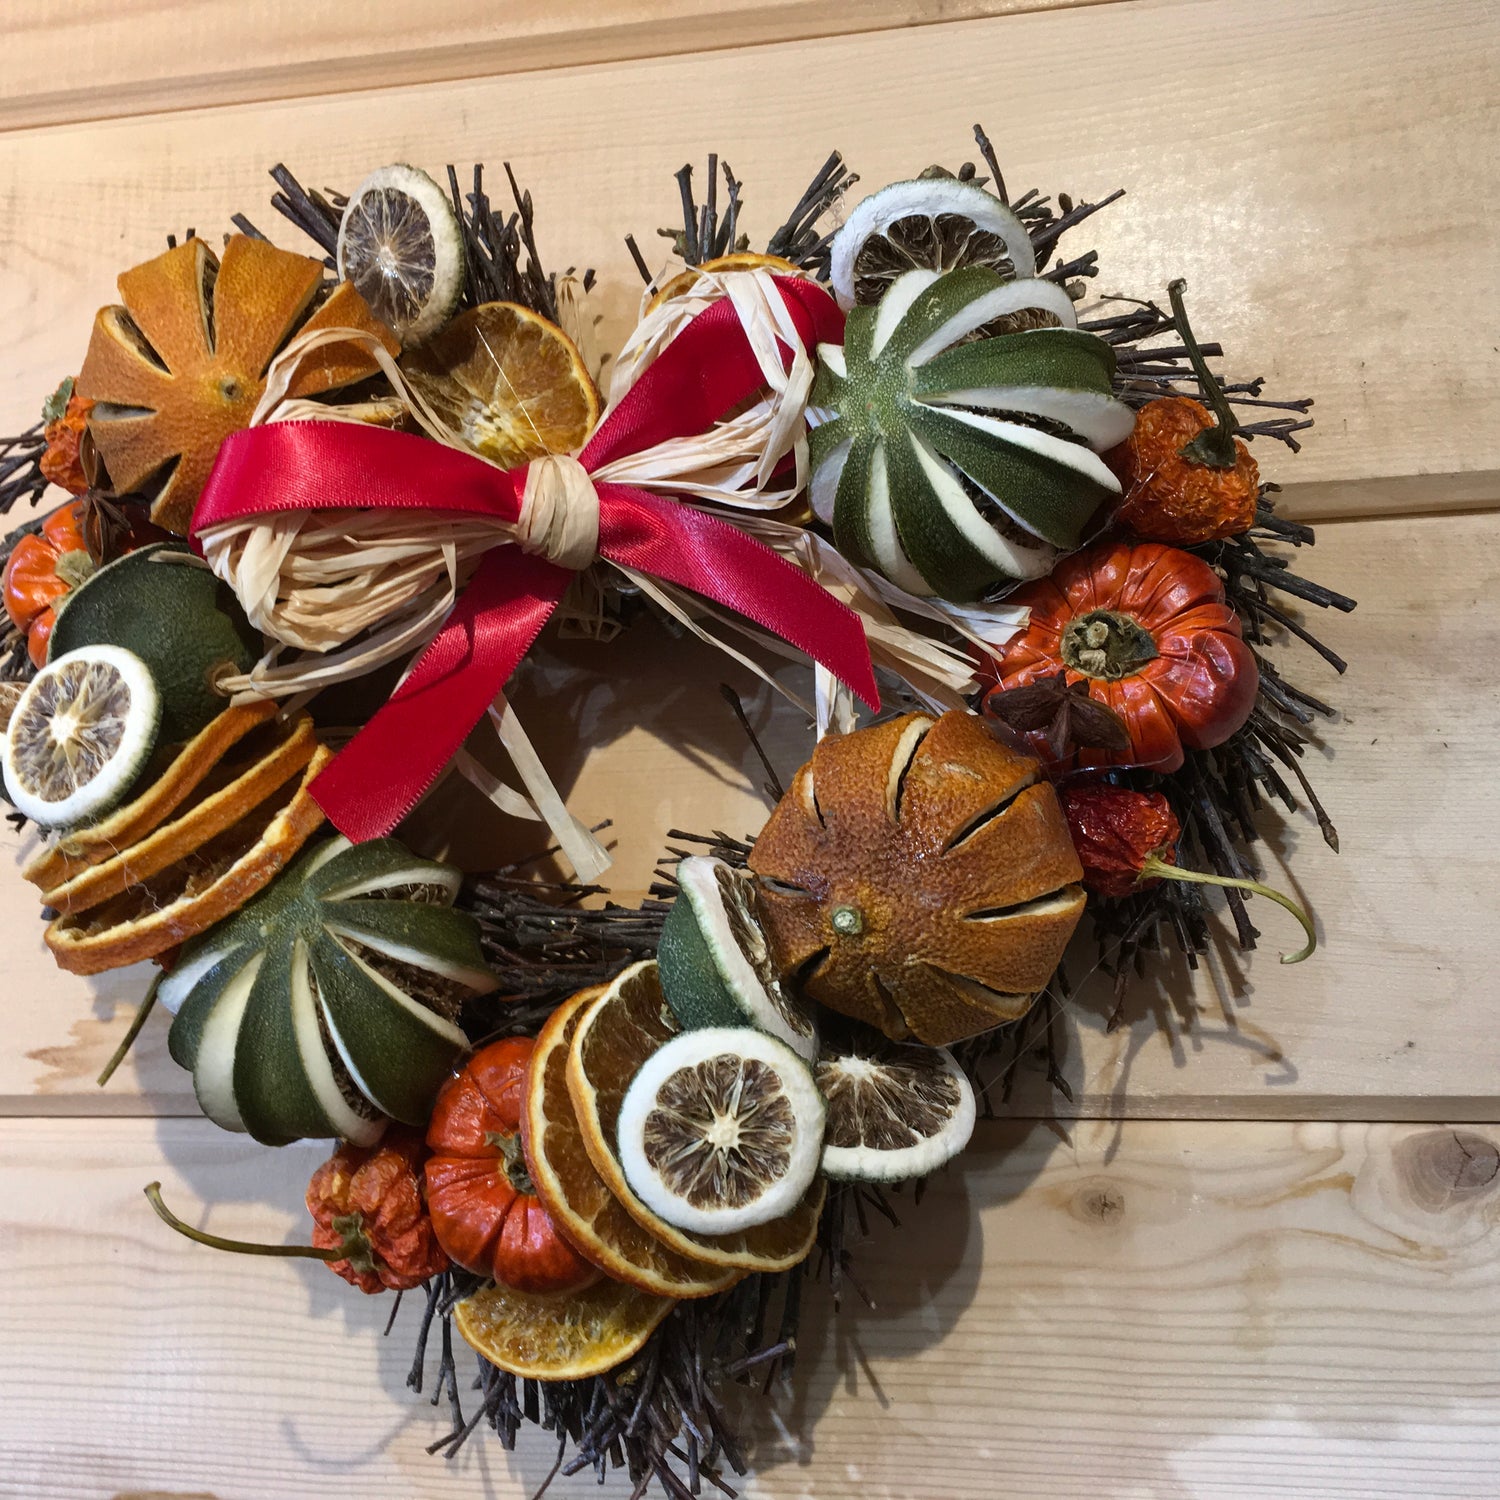 Heart shaped twig wreath that has been beautifully decorated with an assortment of dried fruits, and cinnamon sticks and scented with a wonderful Christmas fragrance. With an additional decorative red bow and hanger.